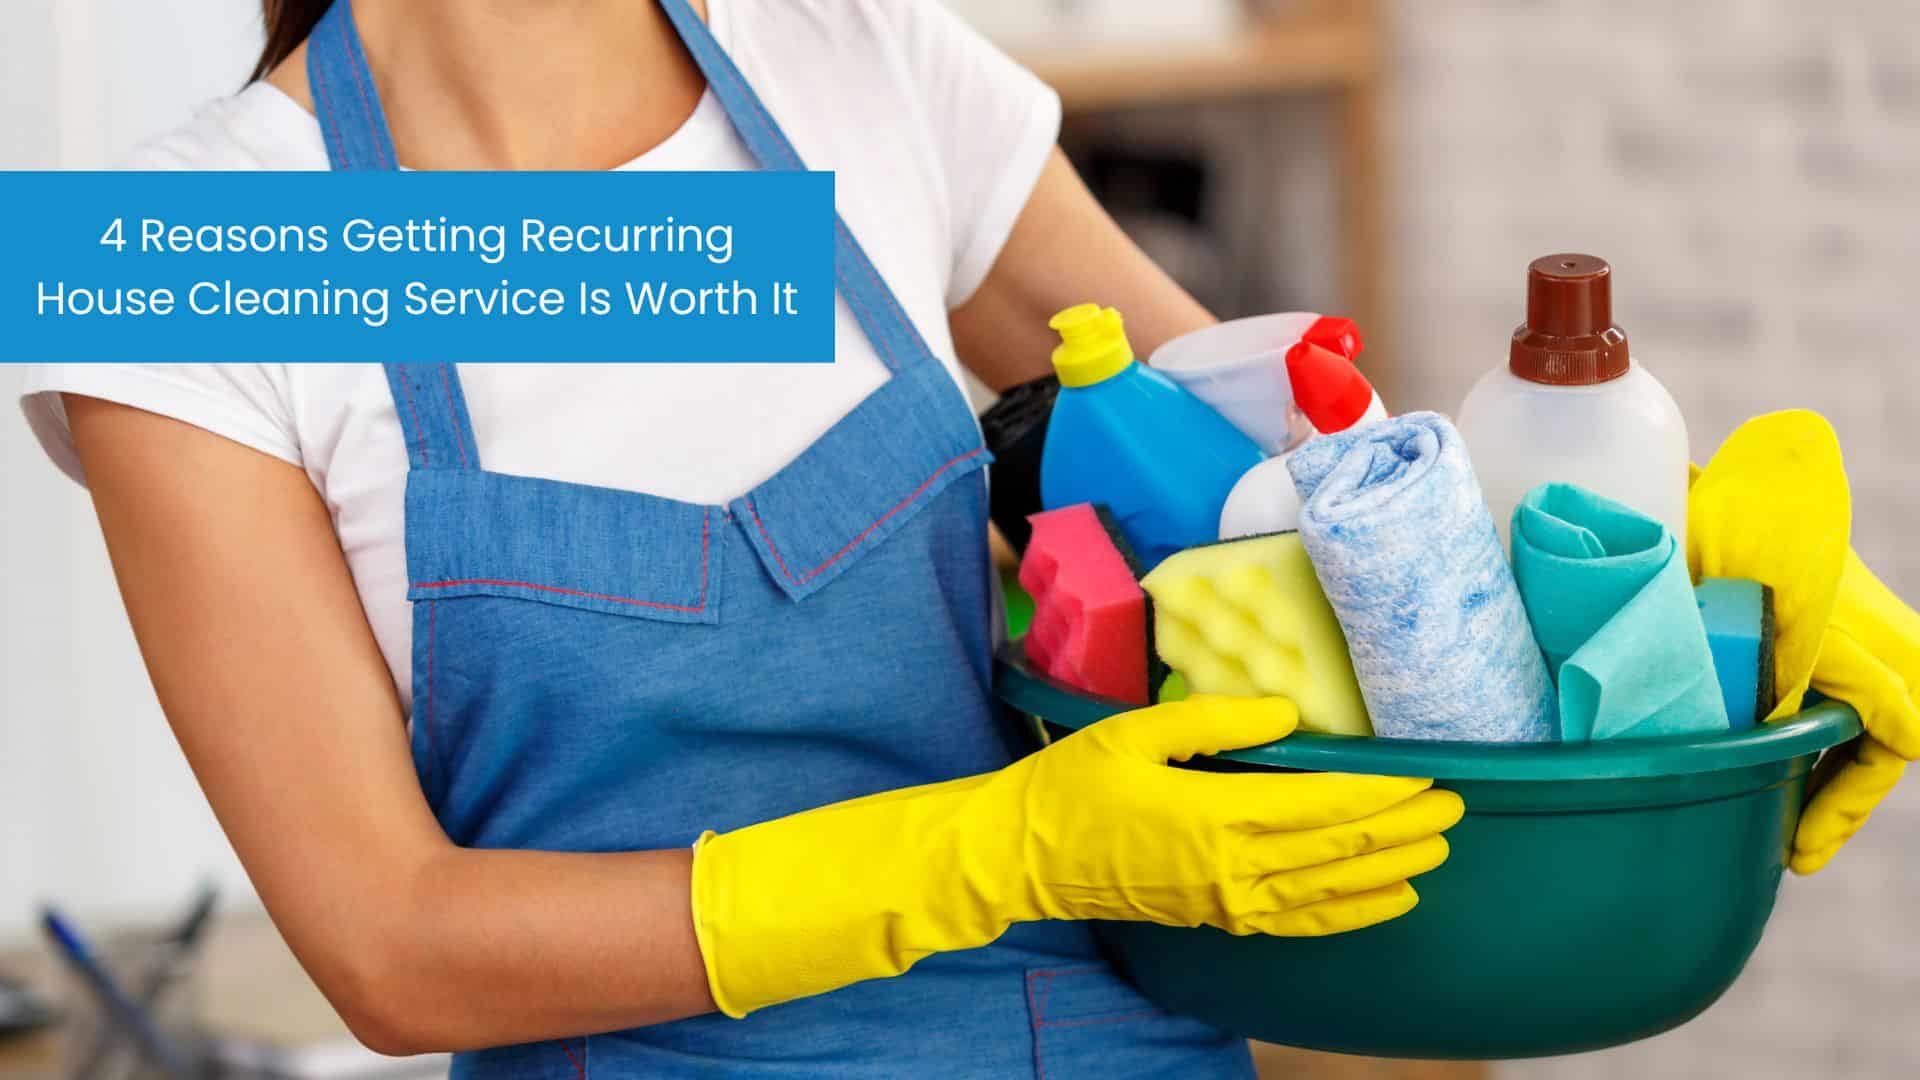 4 Reasons Getting Recurring House Cleaning Service Is Worth It